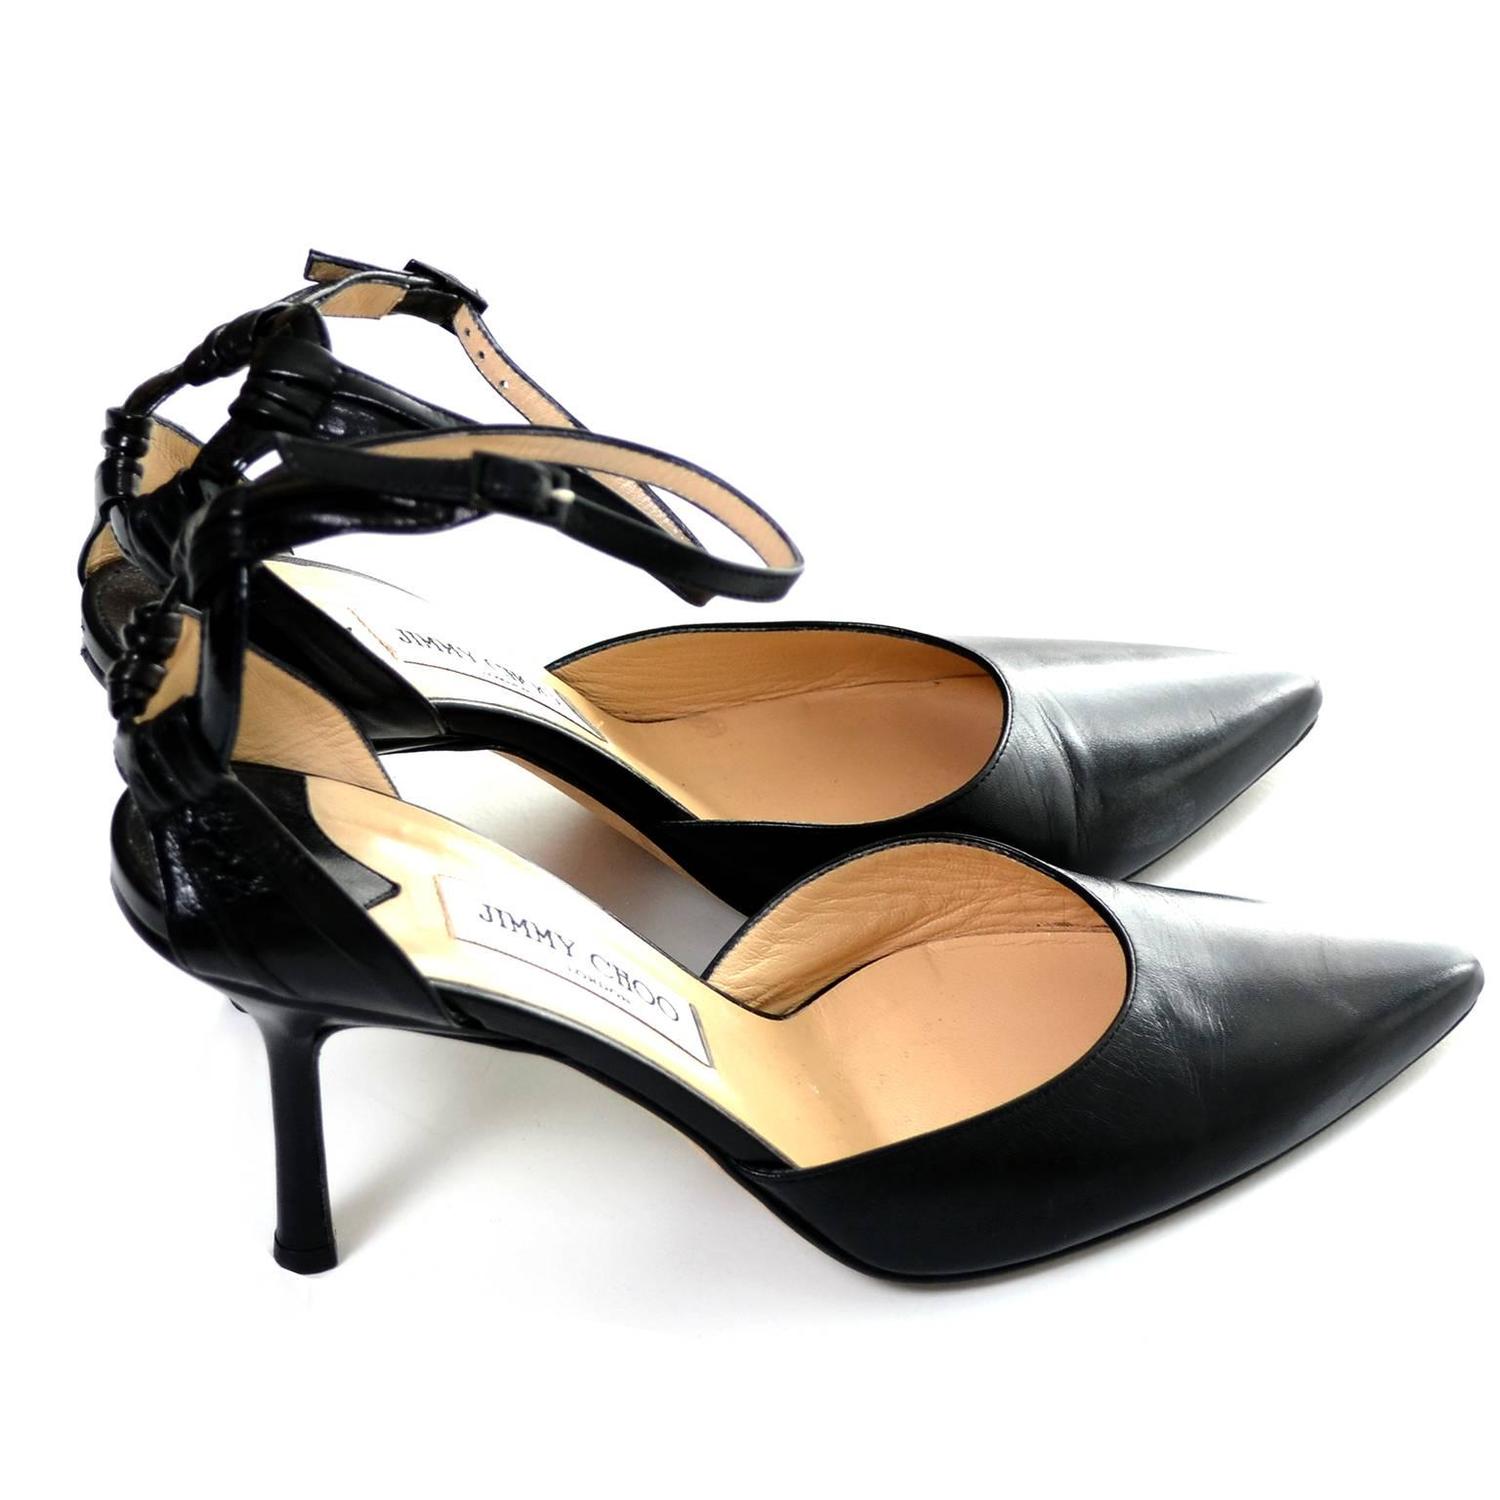 Jimmy Choo London Ankle Strap Shoes Black Leather Heels Pointed Toe 40 ...